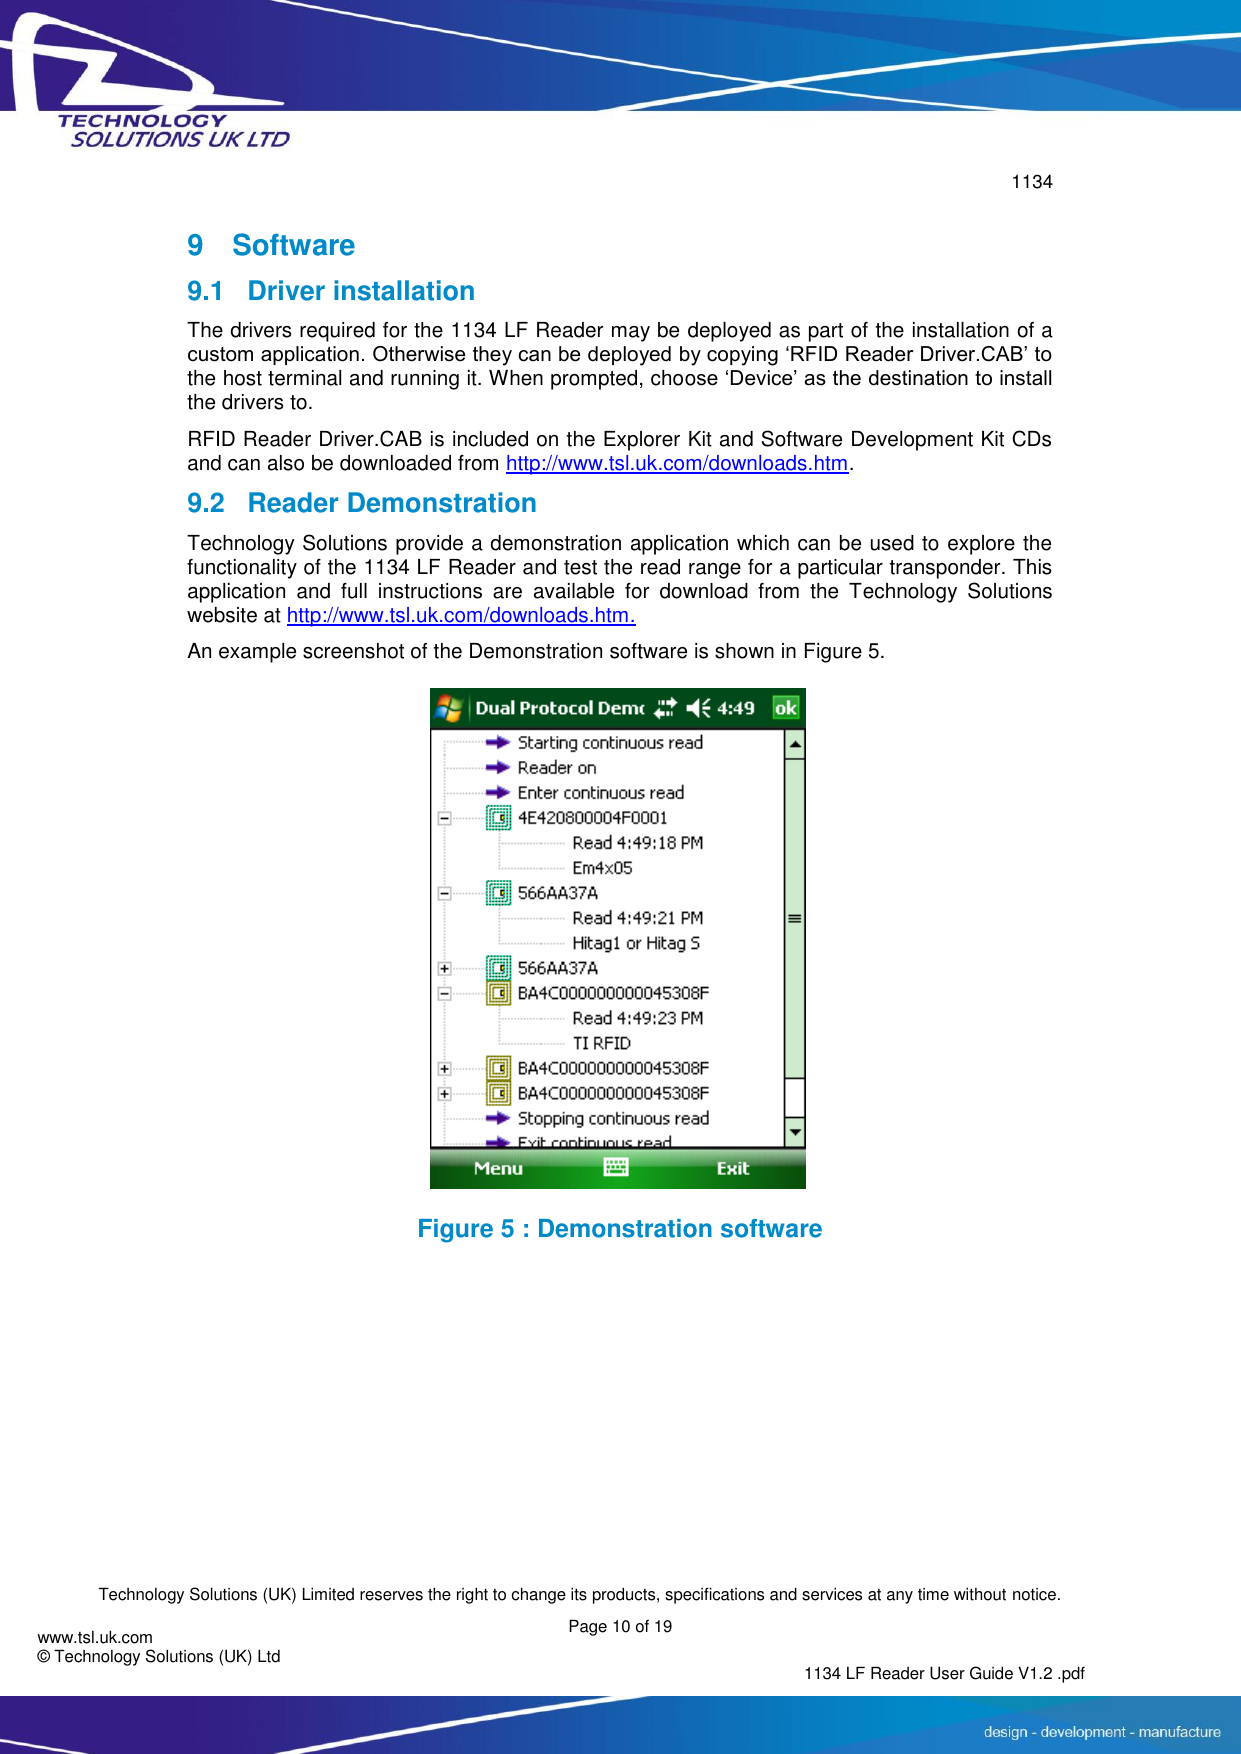        1134  Technology Solutions (UK) Limited reserves the right to change its products, specifications and services at any time without notice.   Page 10 of 19 1134 LF Reader User Guide V1.2 .pdf www.tsl.uk.com © Technology Solutions (UK) Ltd  9  Software 9.1  Driver installation The drivers required for the 1134 LF Reader may be deployed as part of the installation of a custom application. Otherwise they can be deployed by copying ‘RFID Reader Driver.CAB’ to the host terminal and running it. When prompted, choose ‘Device’ as the destination to install the drivers to. RFID Reader Driver.CAB is included on the Explorer Kit and Software Development Kit CDs and can also be downloaded from http://www.tsl.uk.com/downloads.htm. 9.2 Reader Demonstration Technology Solutions provide a demonstration application which can be used to explore the functionality of the 1134 LF Reader and test the read range for a particular transponder. This application  and  full  instructions  are  available  for  download  from  the  Technology  Solutions website at http://www.tsl.uk.com/downloads.htm.  An example screenshot of the Demonstration software is shown in Figure 5.  Figure 5 : Demonstration software     